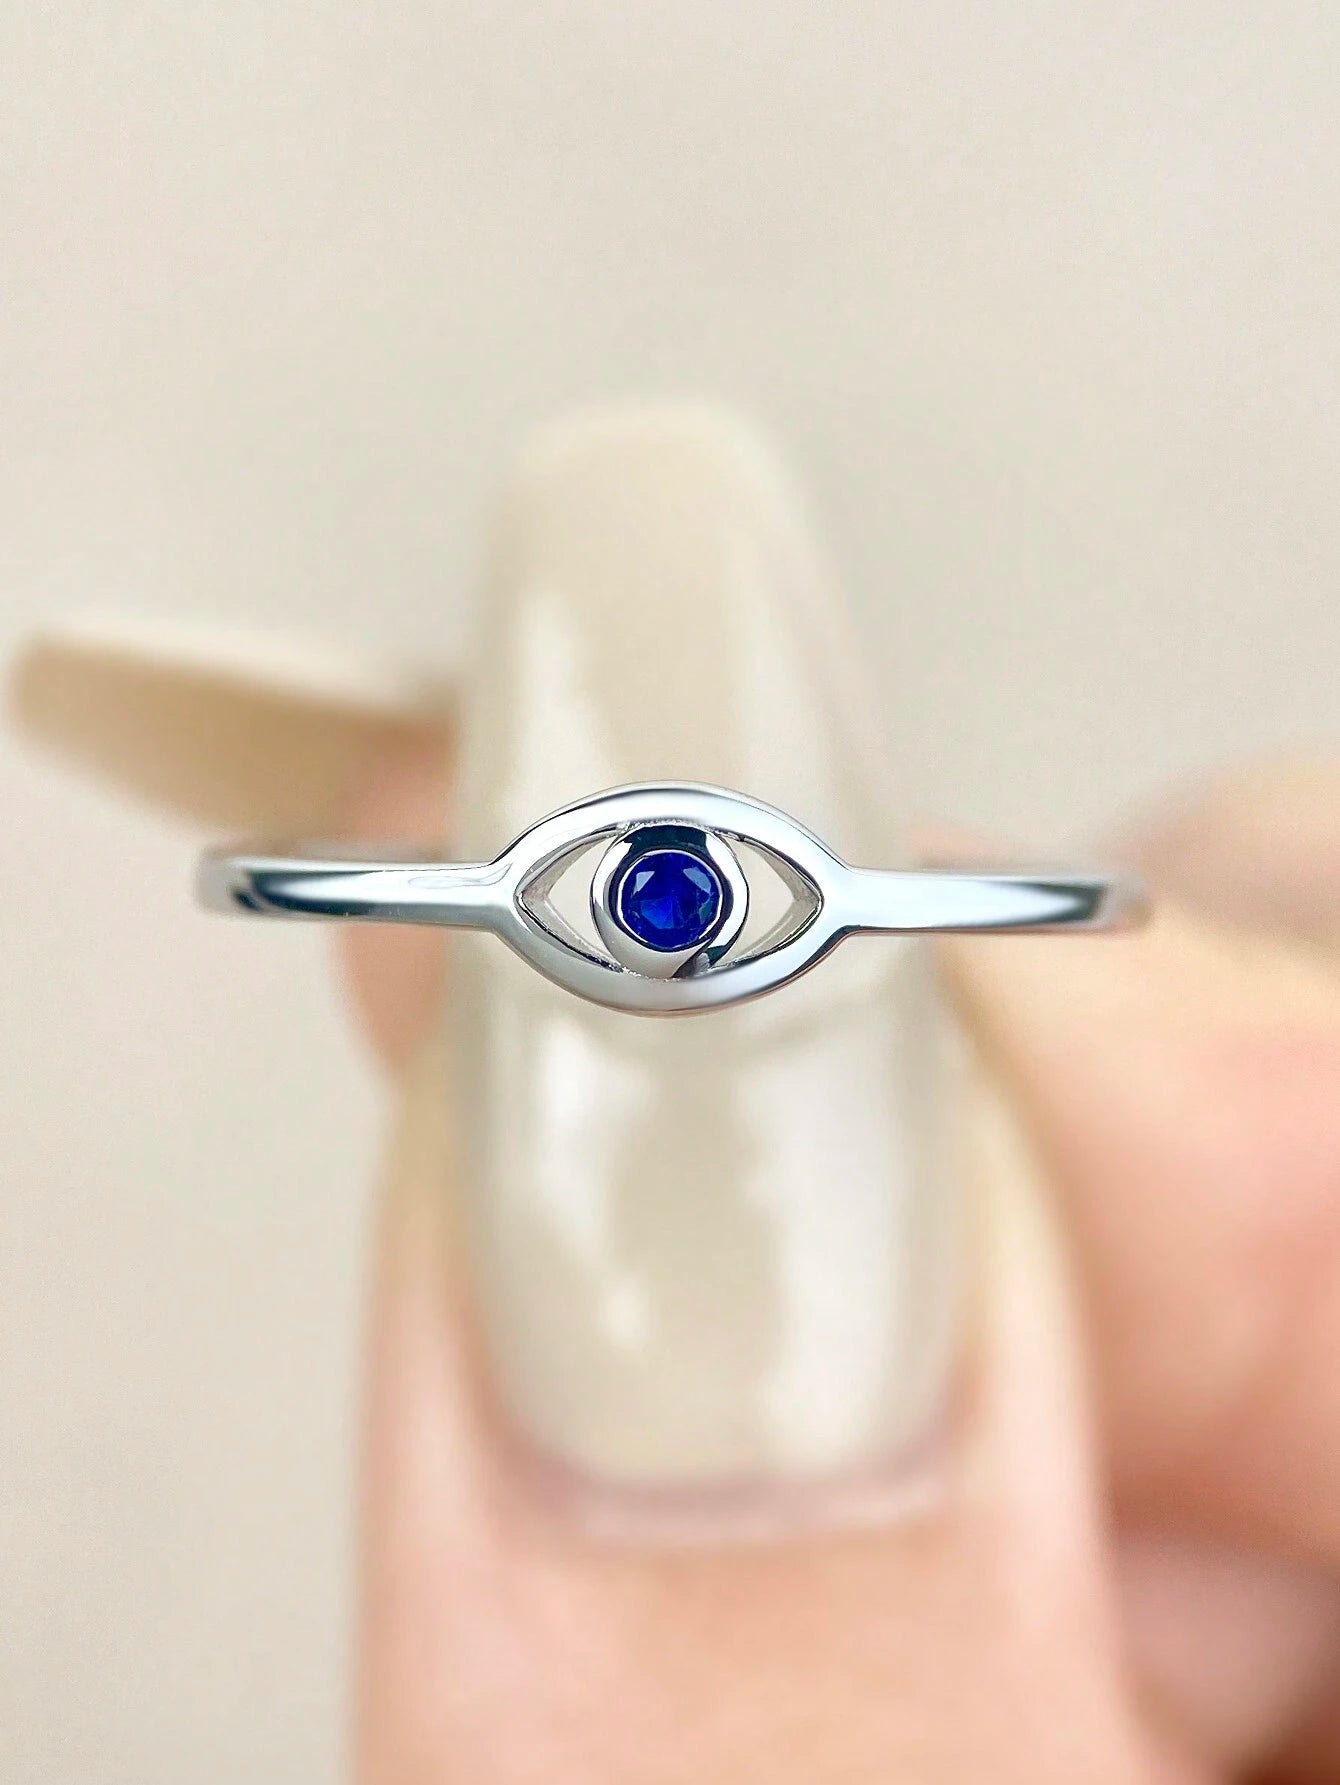 1pc Minimalist Devil's Eye Retro Blue Eye Cubic Zirconia Ring for Women - S925 Sterling Silver Fine Ladies Jewelry Gift, Ideal for Holidays